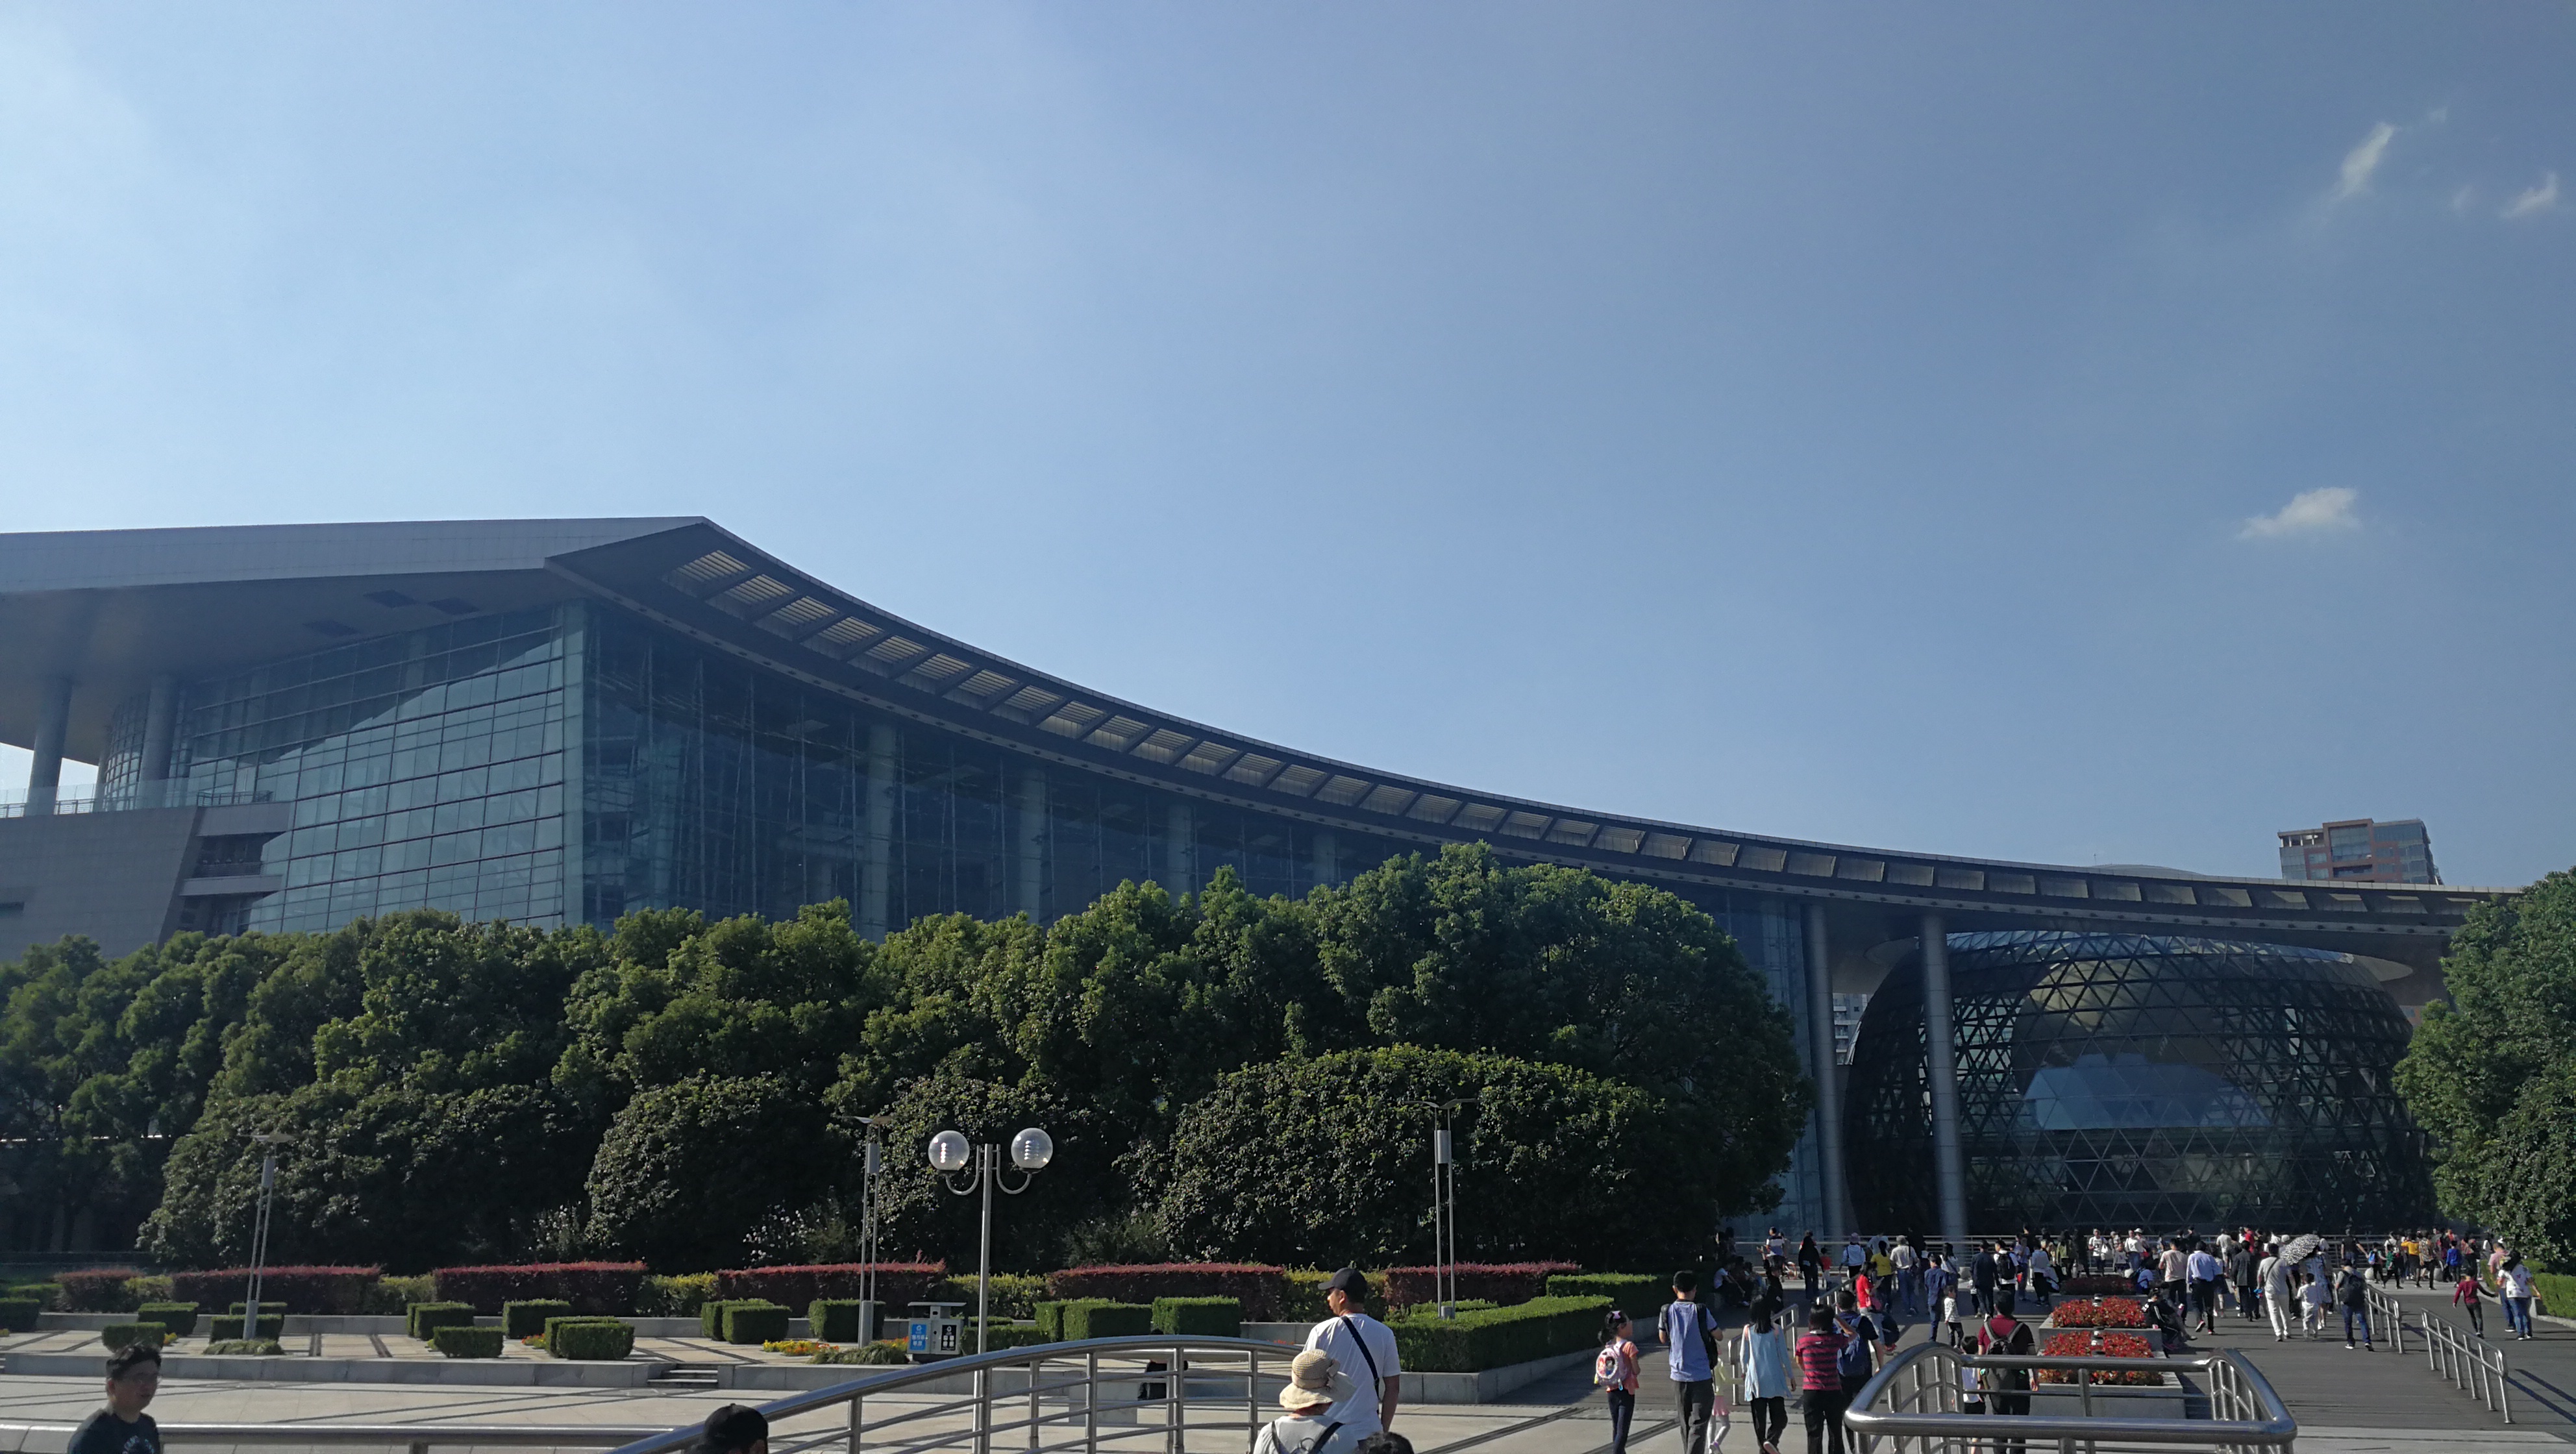 Shanghai Science and Technology Museum